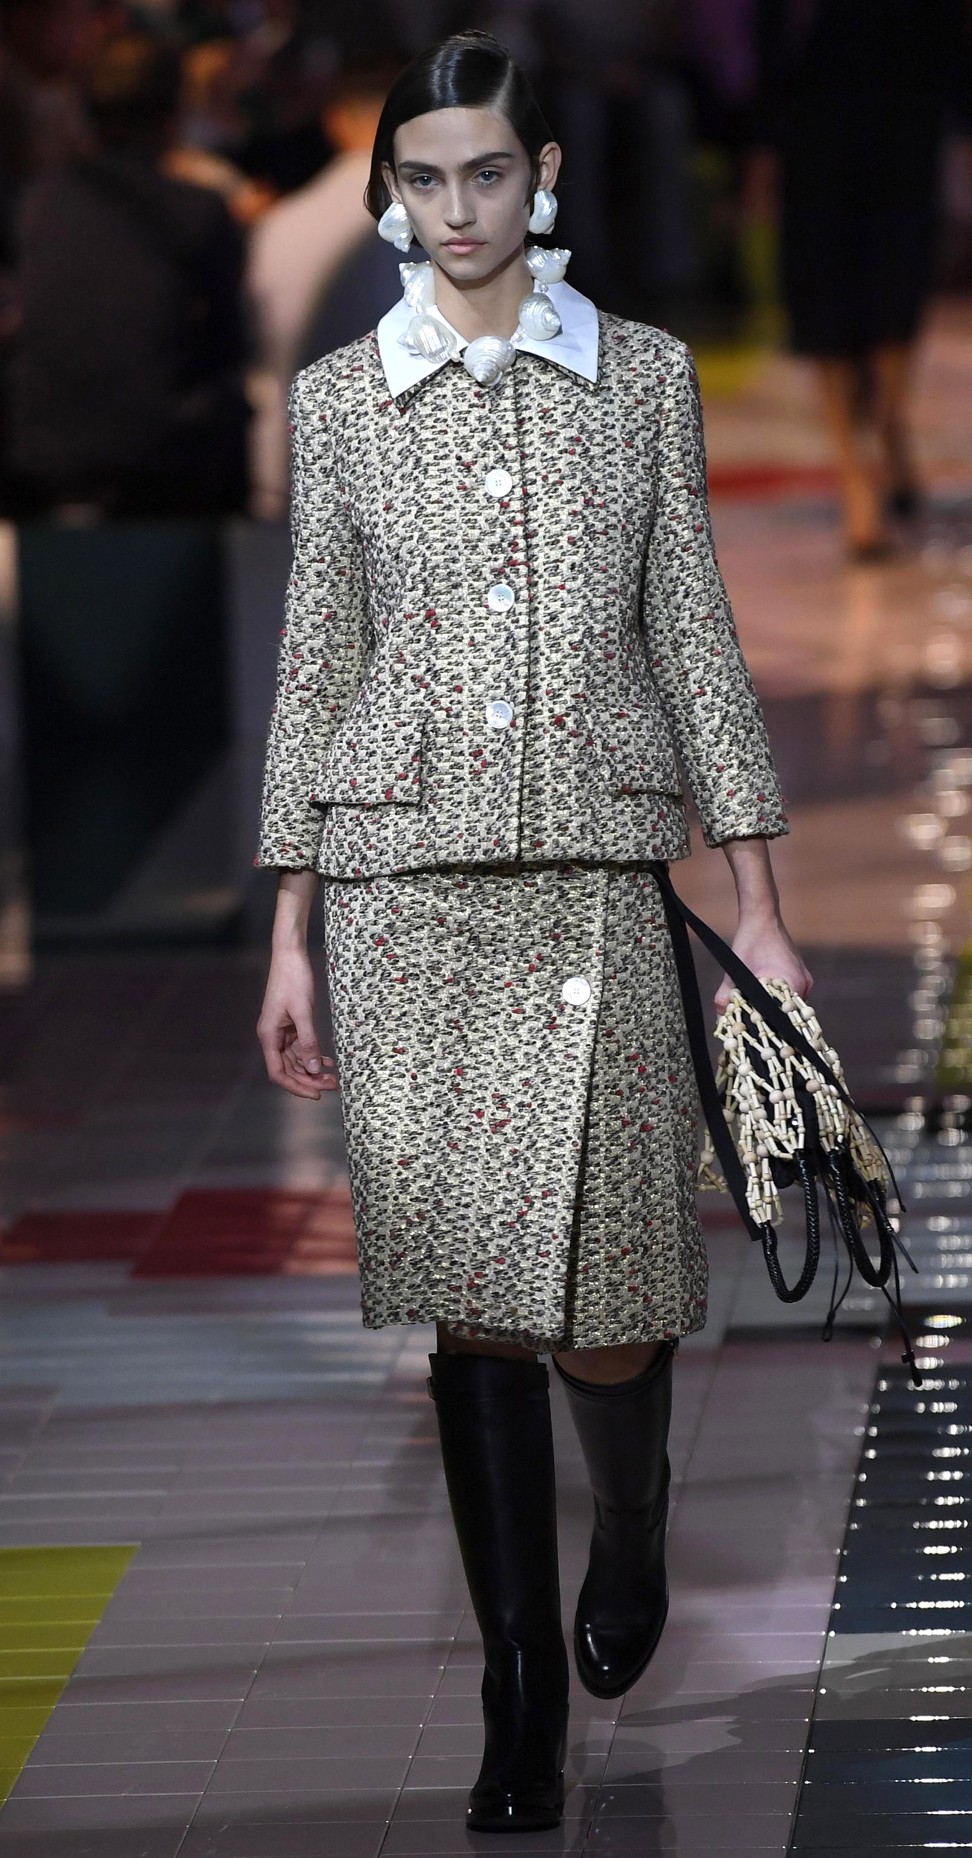 Milan Fashion Week: Prada reveals a ‘less-is-more’ aesthetic in support ...